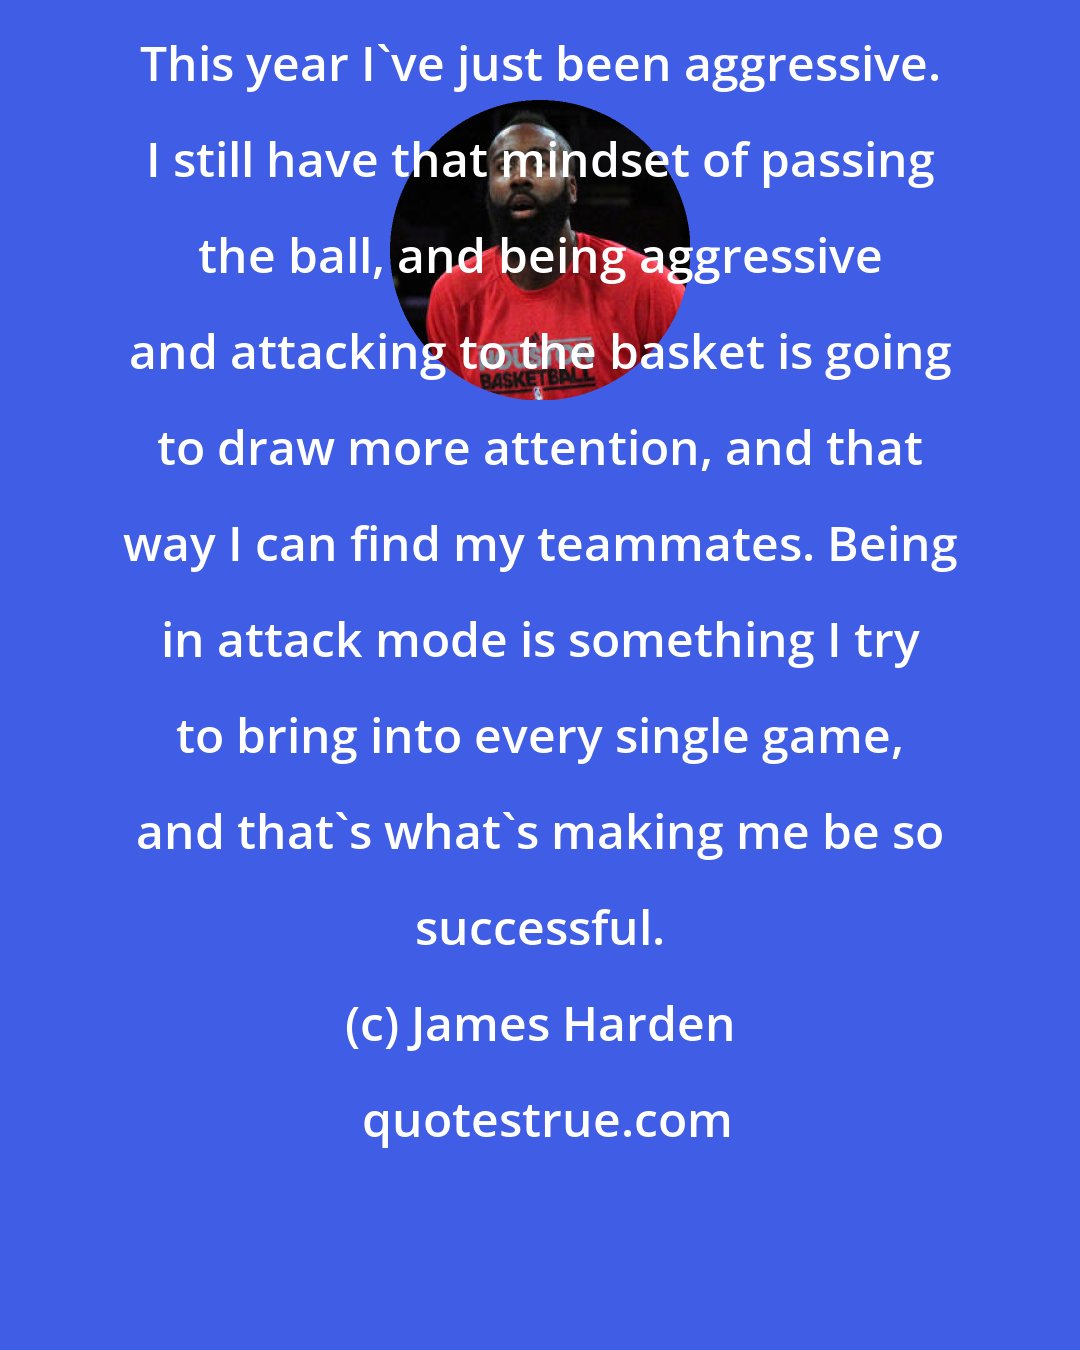 James Harden: This year I've just been aggressive. I still have that mindset of passing the ball, and being aggressive and attacking to the basket is going to draw more attention, and that way I can find my teammates. Being in attack mode is something I try to bring into every single game, and that's what's making me be so successful.